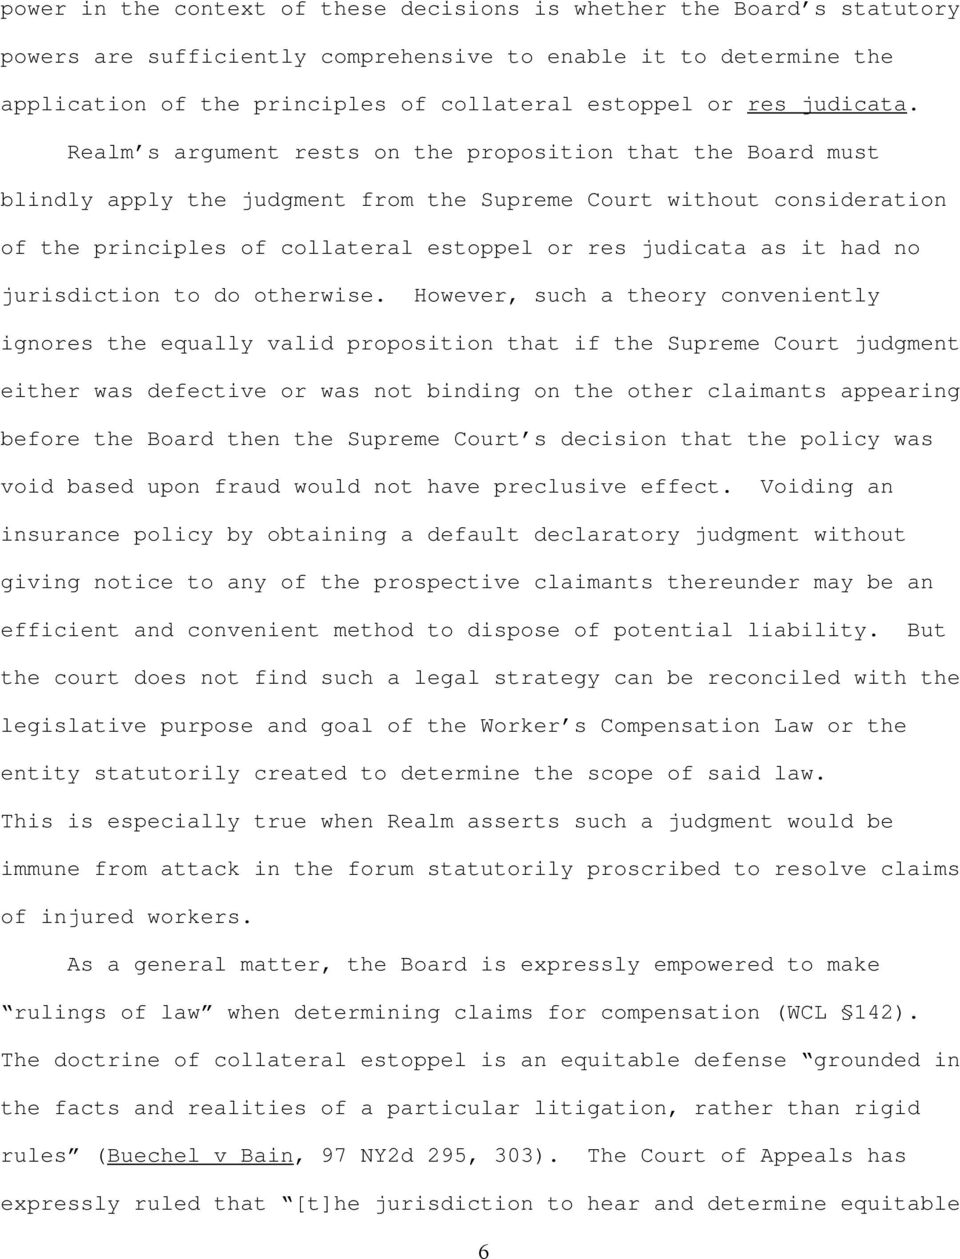 Realm s argument rests on the proposition that the Board must blindly apply the judgment from the Supreme Court without consideration of the principles of collateral estoppel or res judicata as it